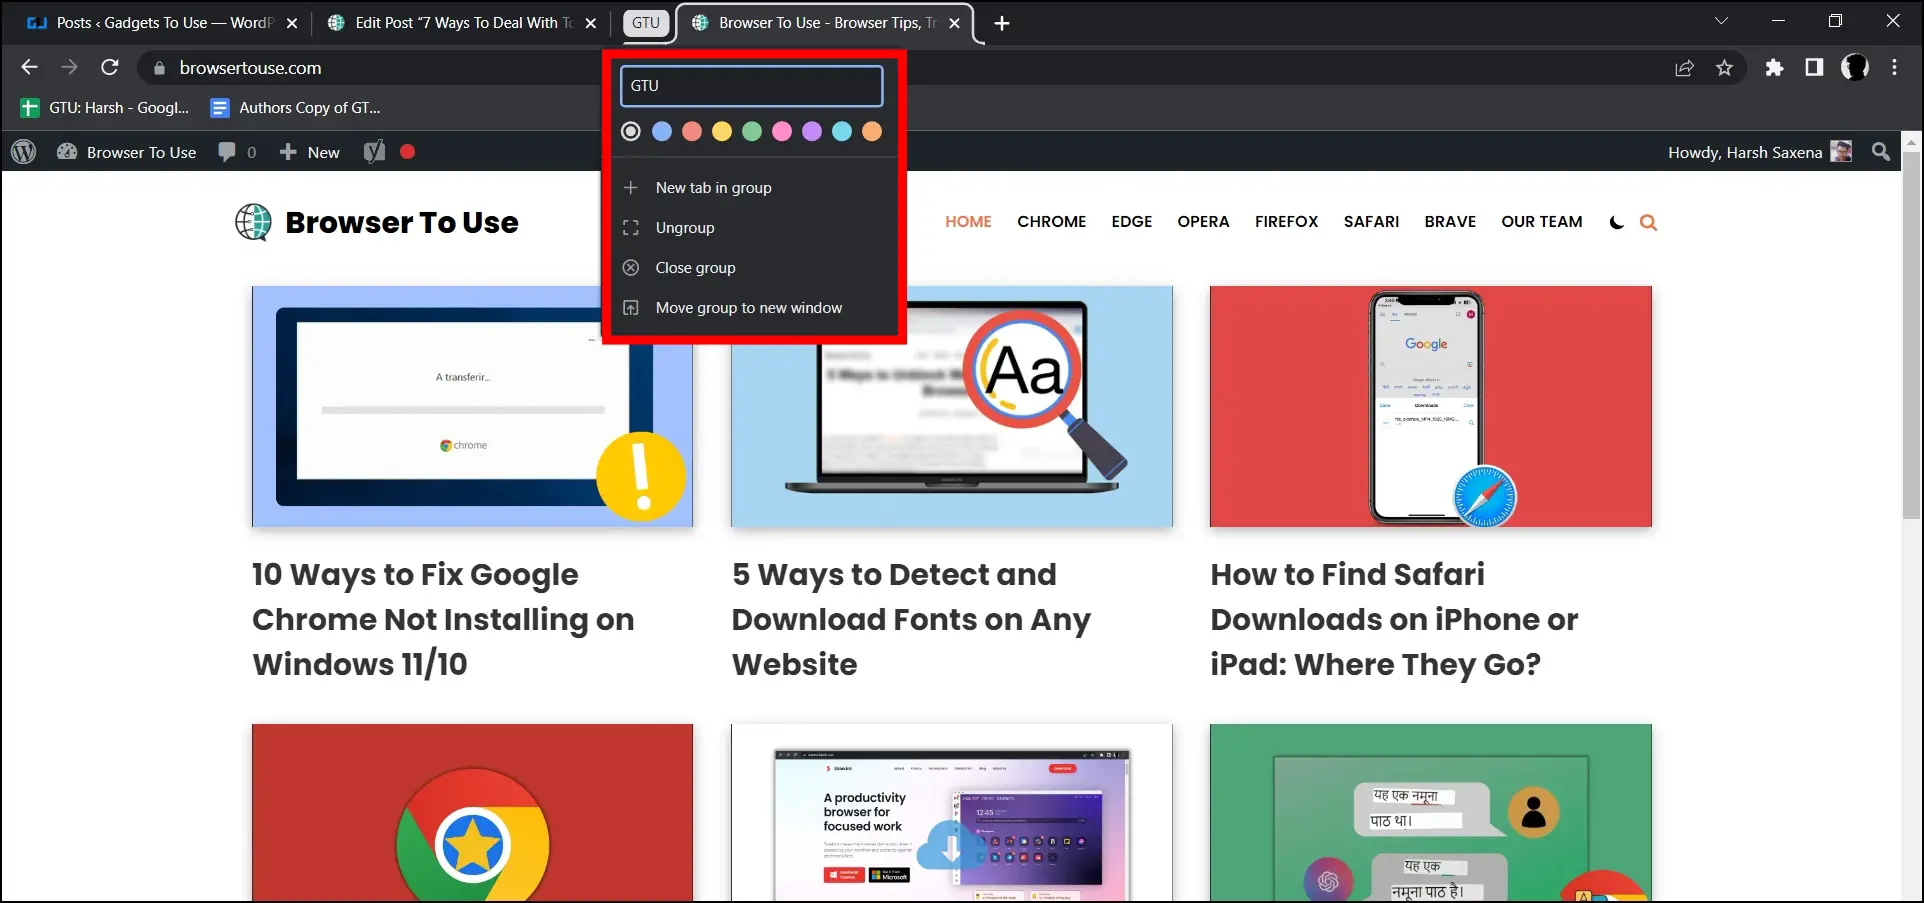 Group Your Tabs To Deal With Too Many Tabs Opened in Chrome